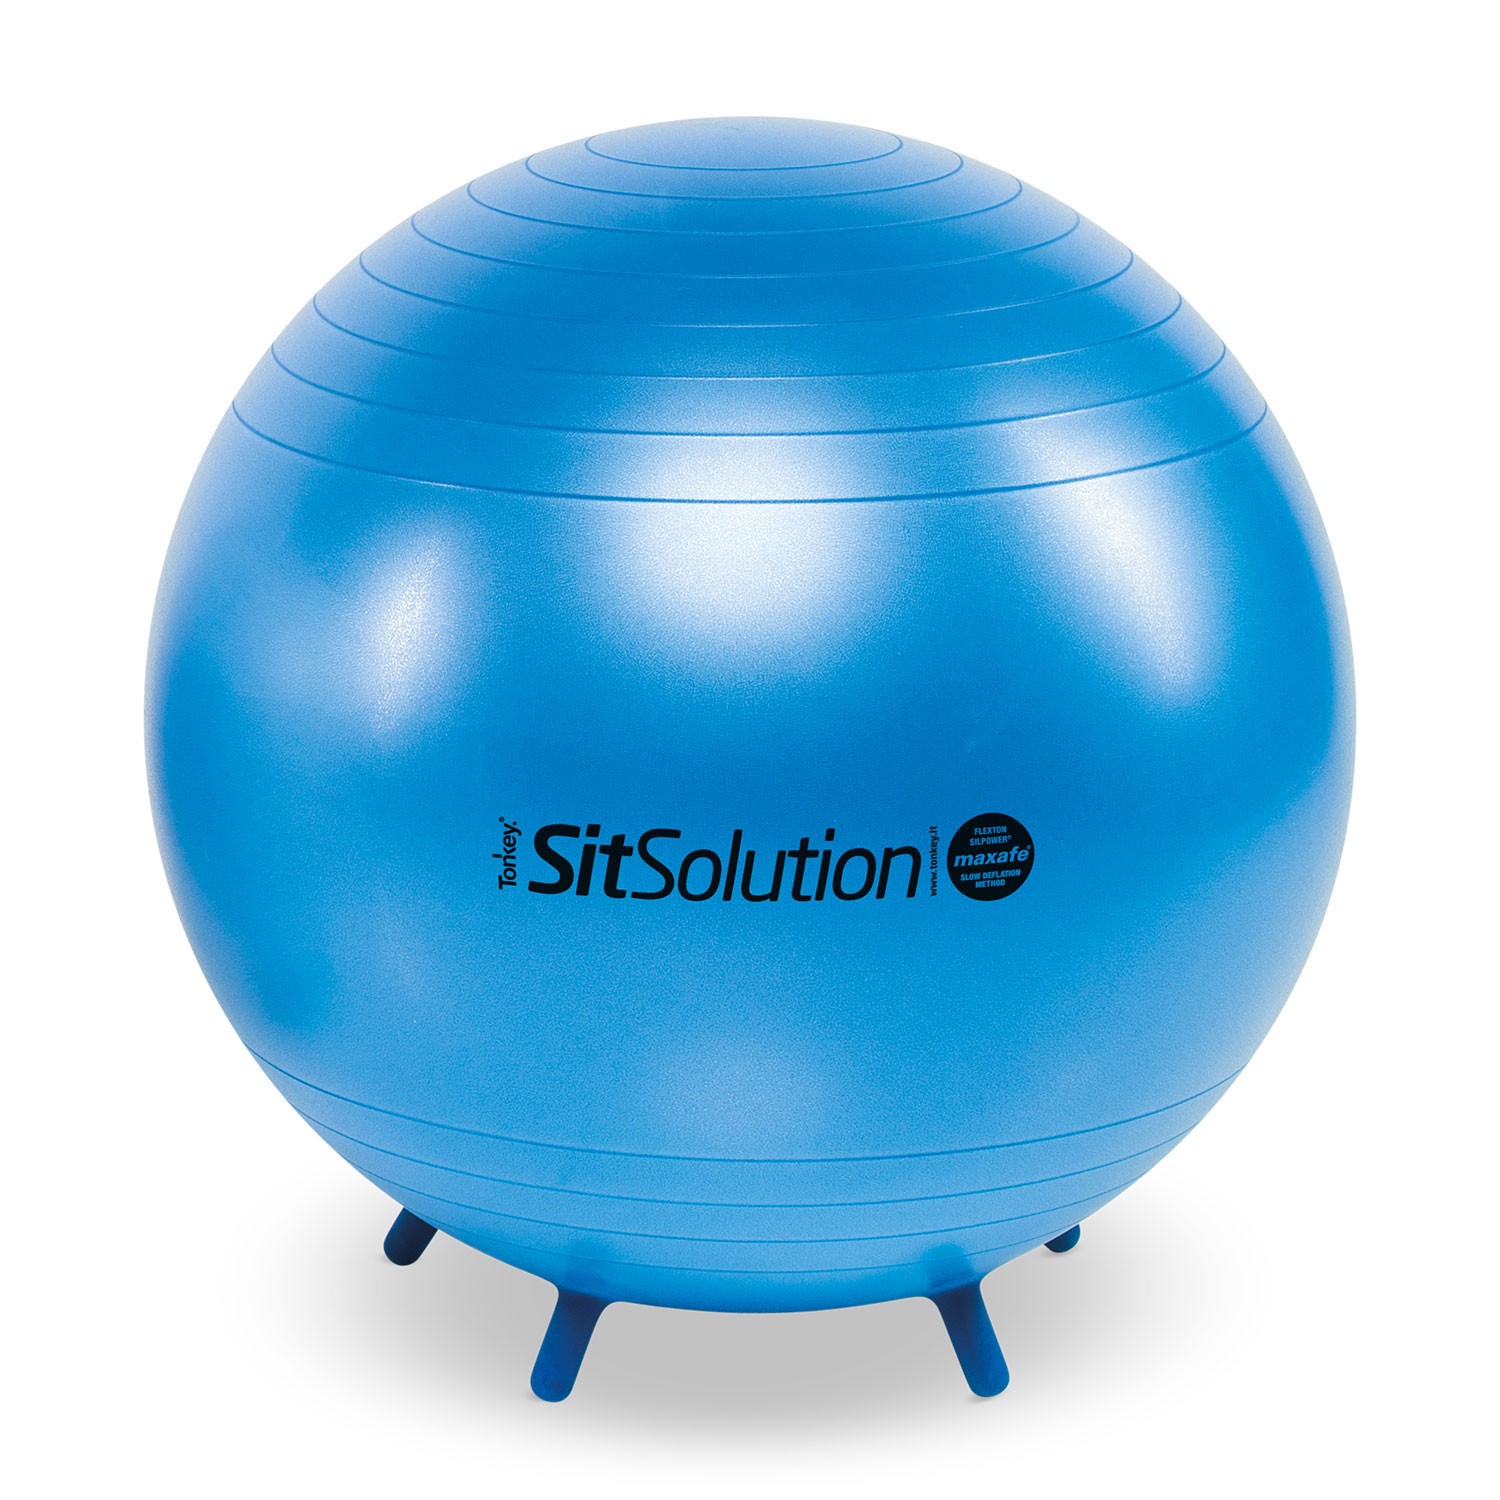 Sitsolution MAXAFE 65 cm